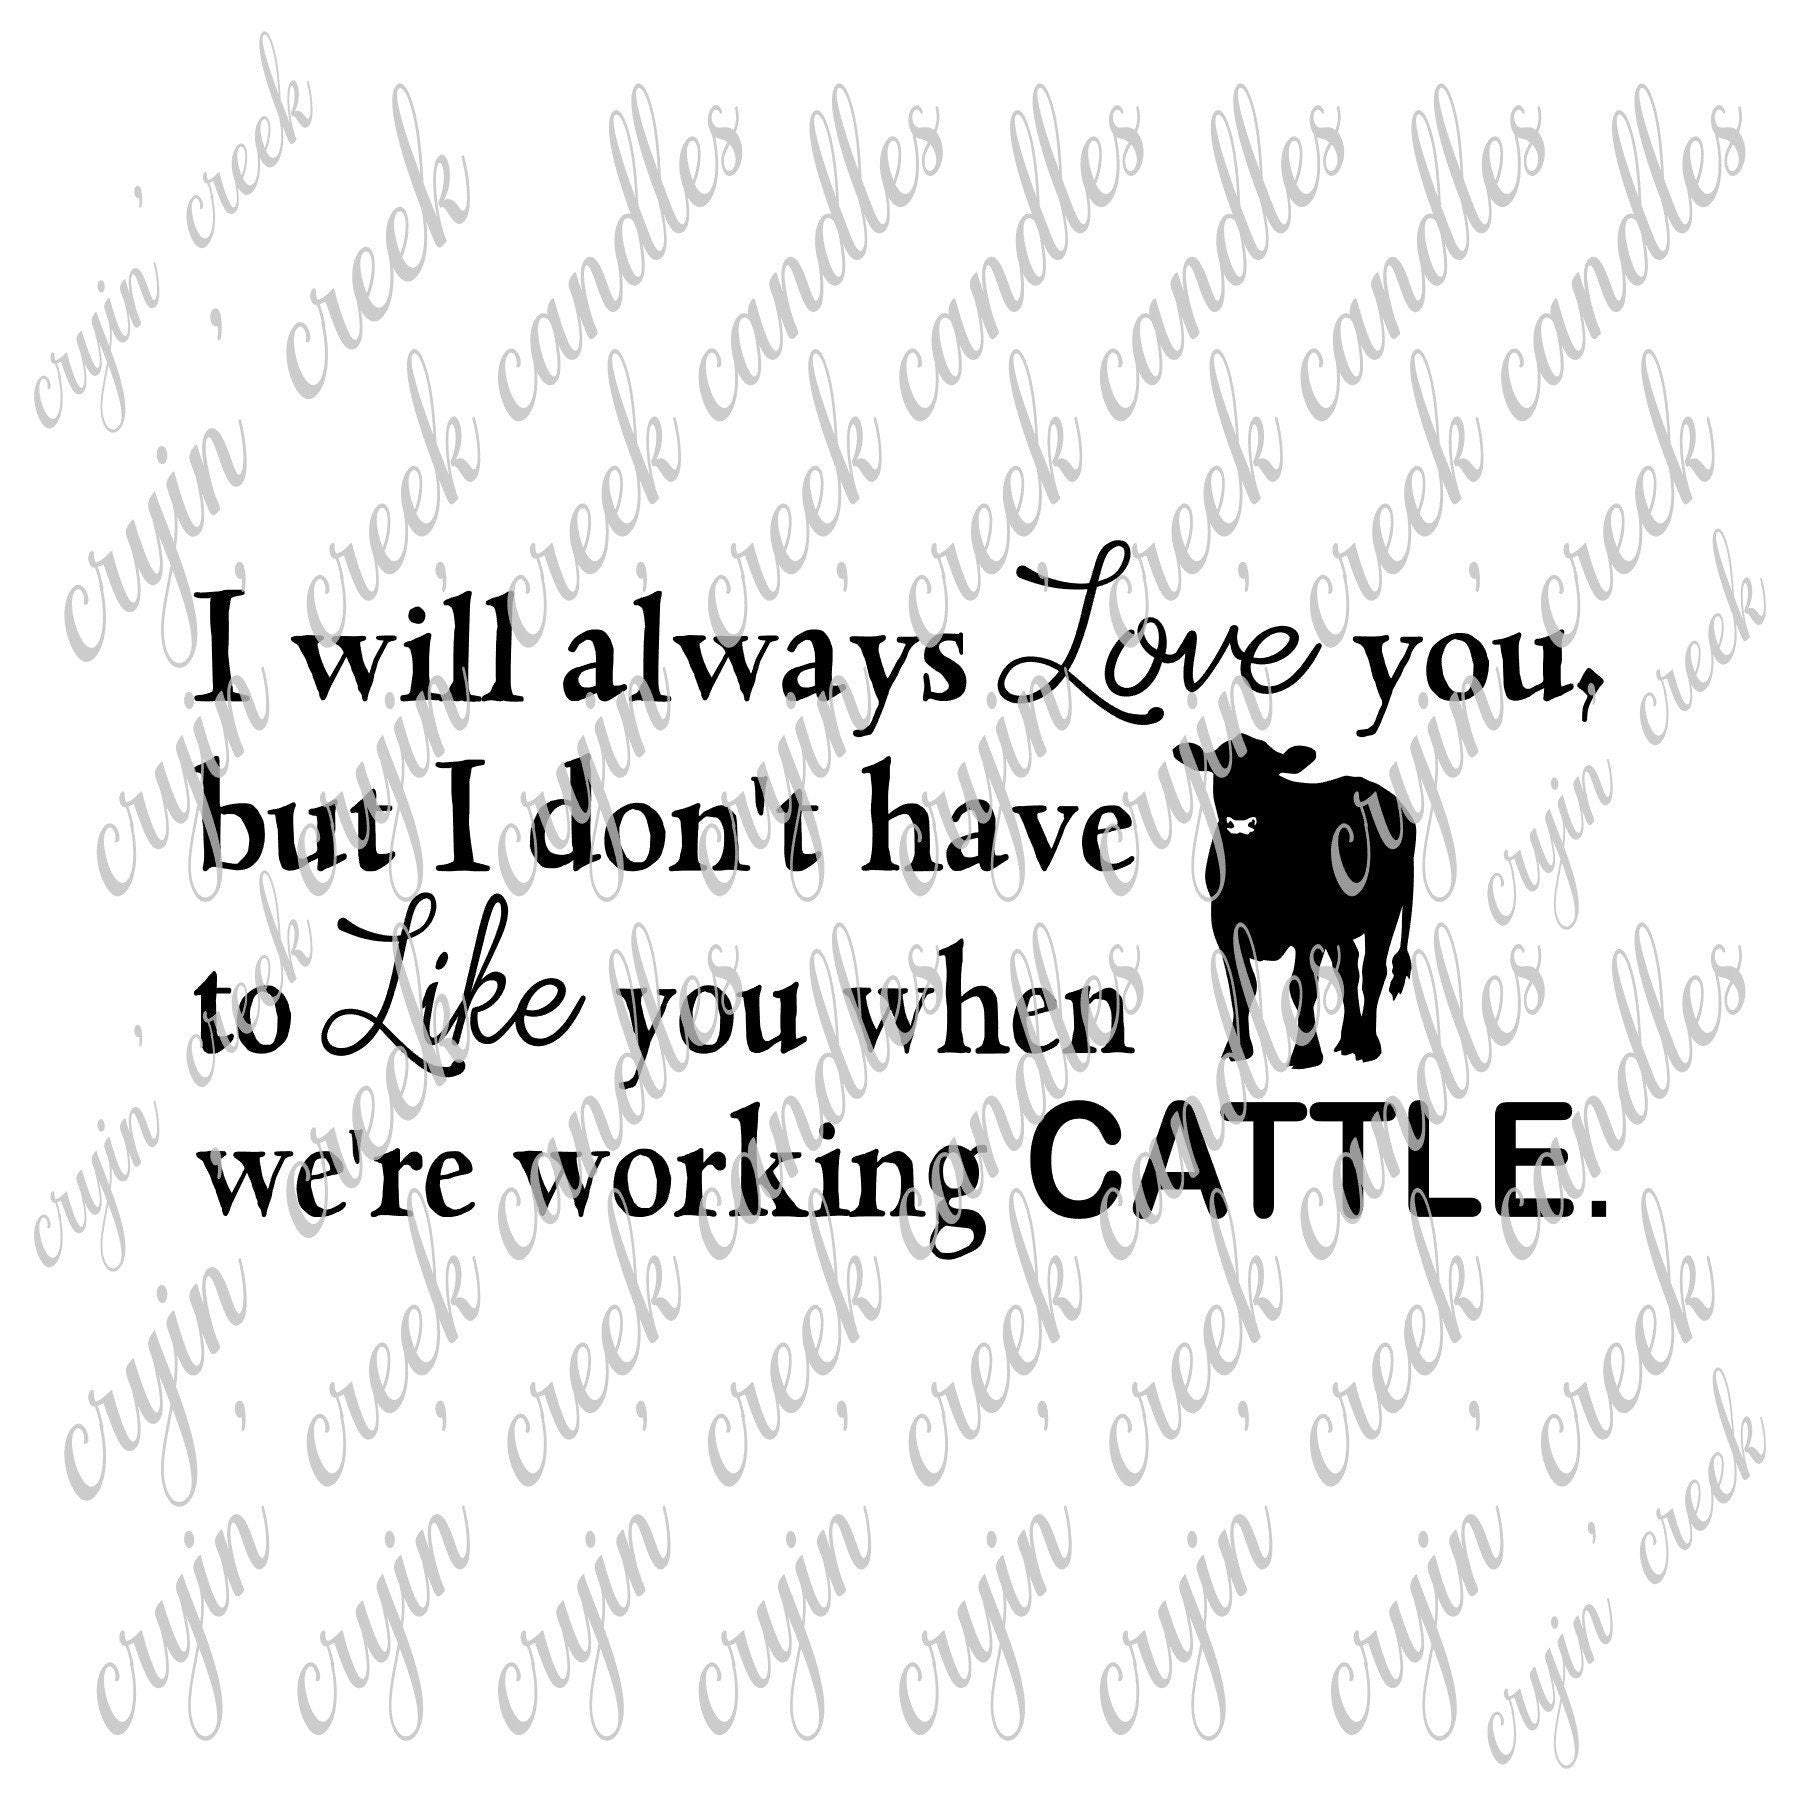 I Don't Have to Like You When Working Cattle Download | Cryin Creek